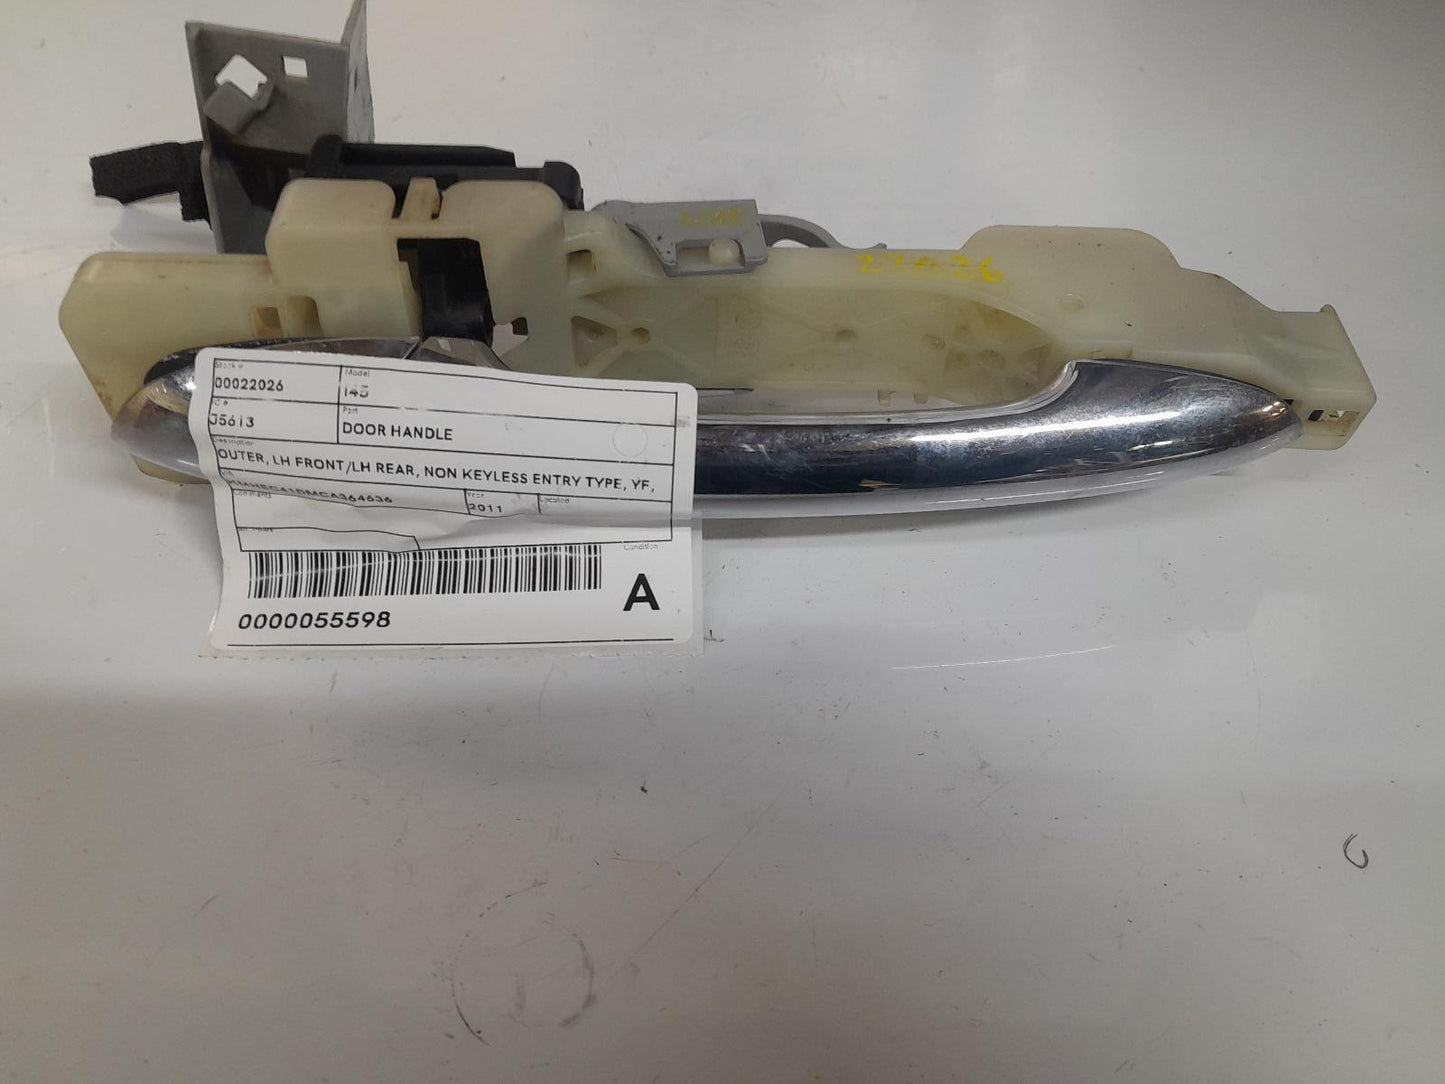 HYUNDAI I45 DOOR HANDLE OUTER, LH FRONT/LH REAR, NON KEYLESS ENTRY TYPE, YF, 02/10-04/14